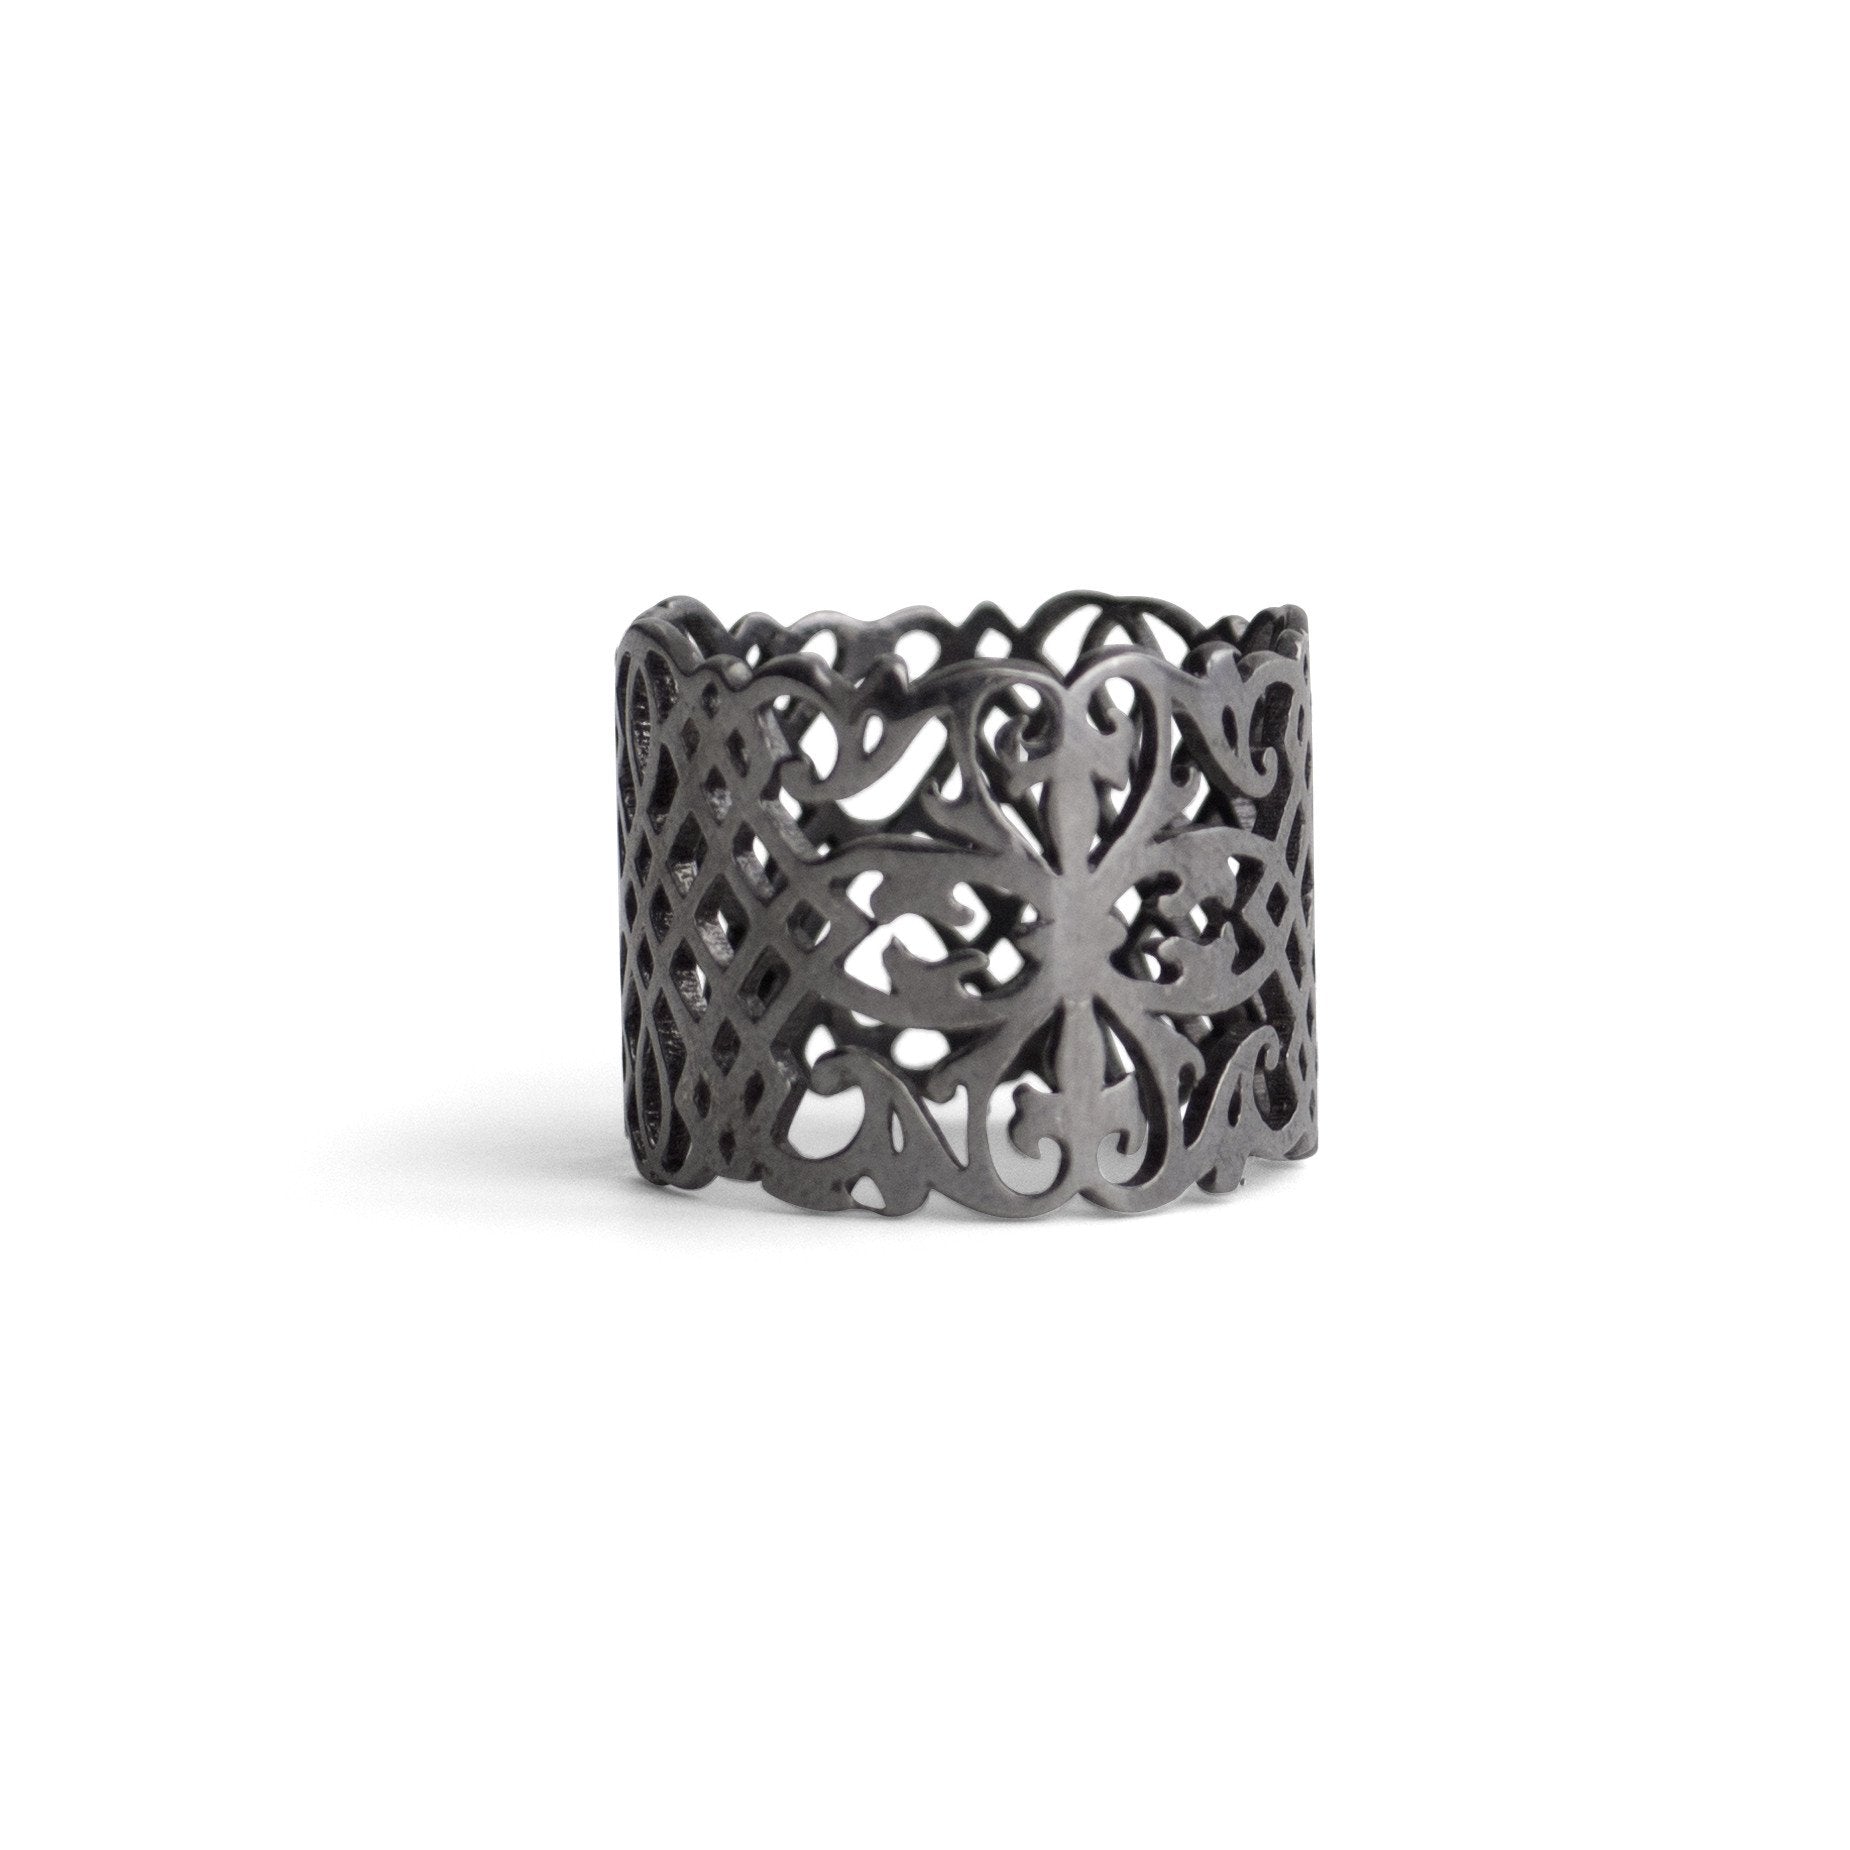 sterling silver plated in black rhodium / 5 arabesque cigar band